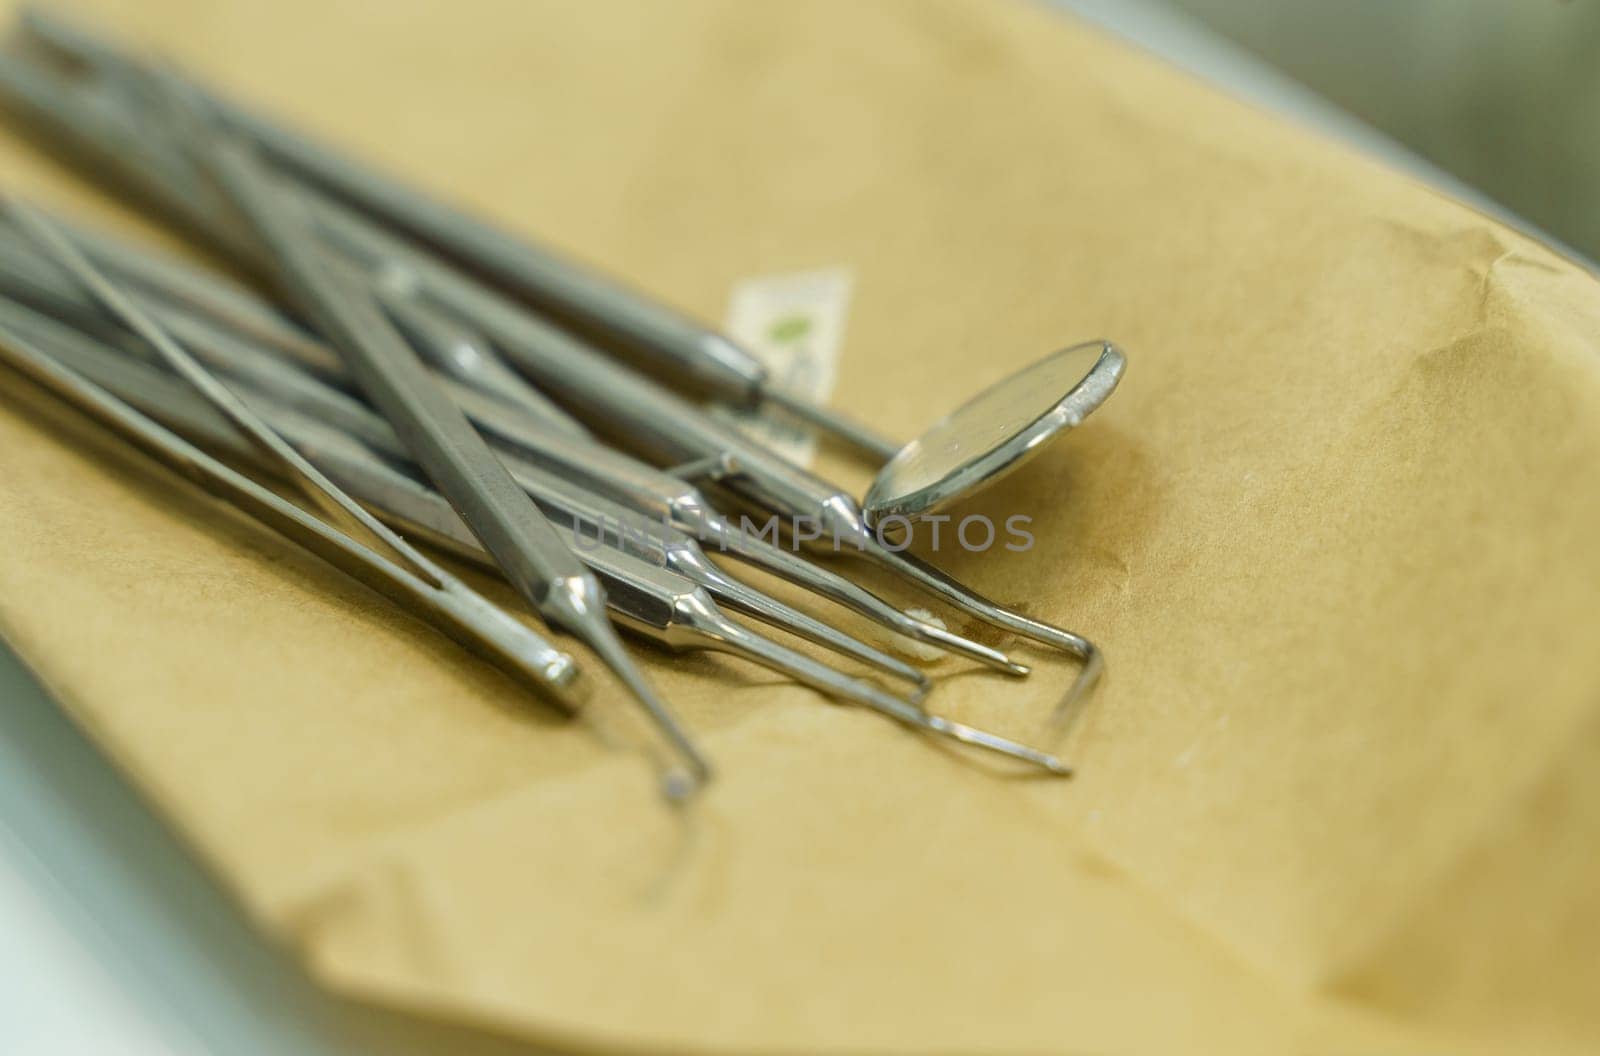 Dental instruments lie on wrapping paper before use. by Sd28DimoN_1976